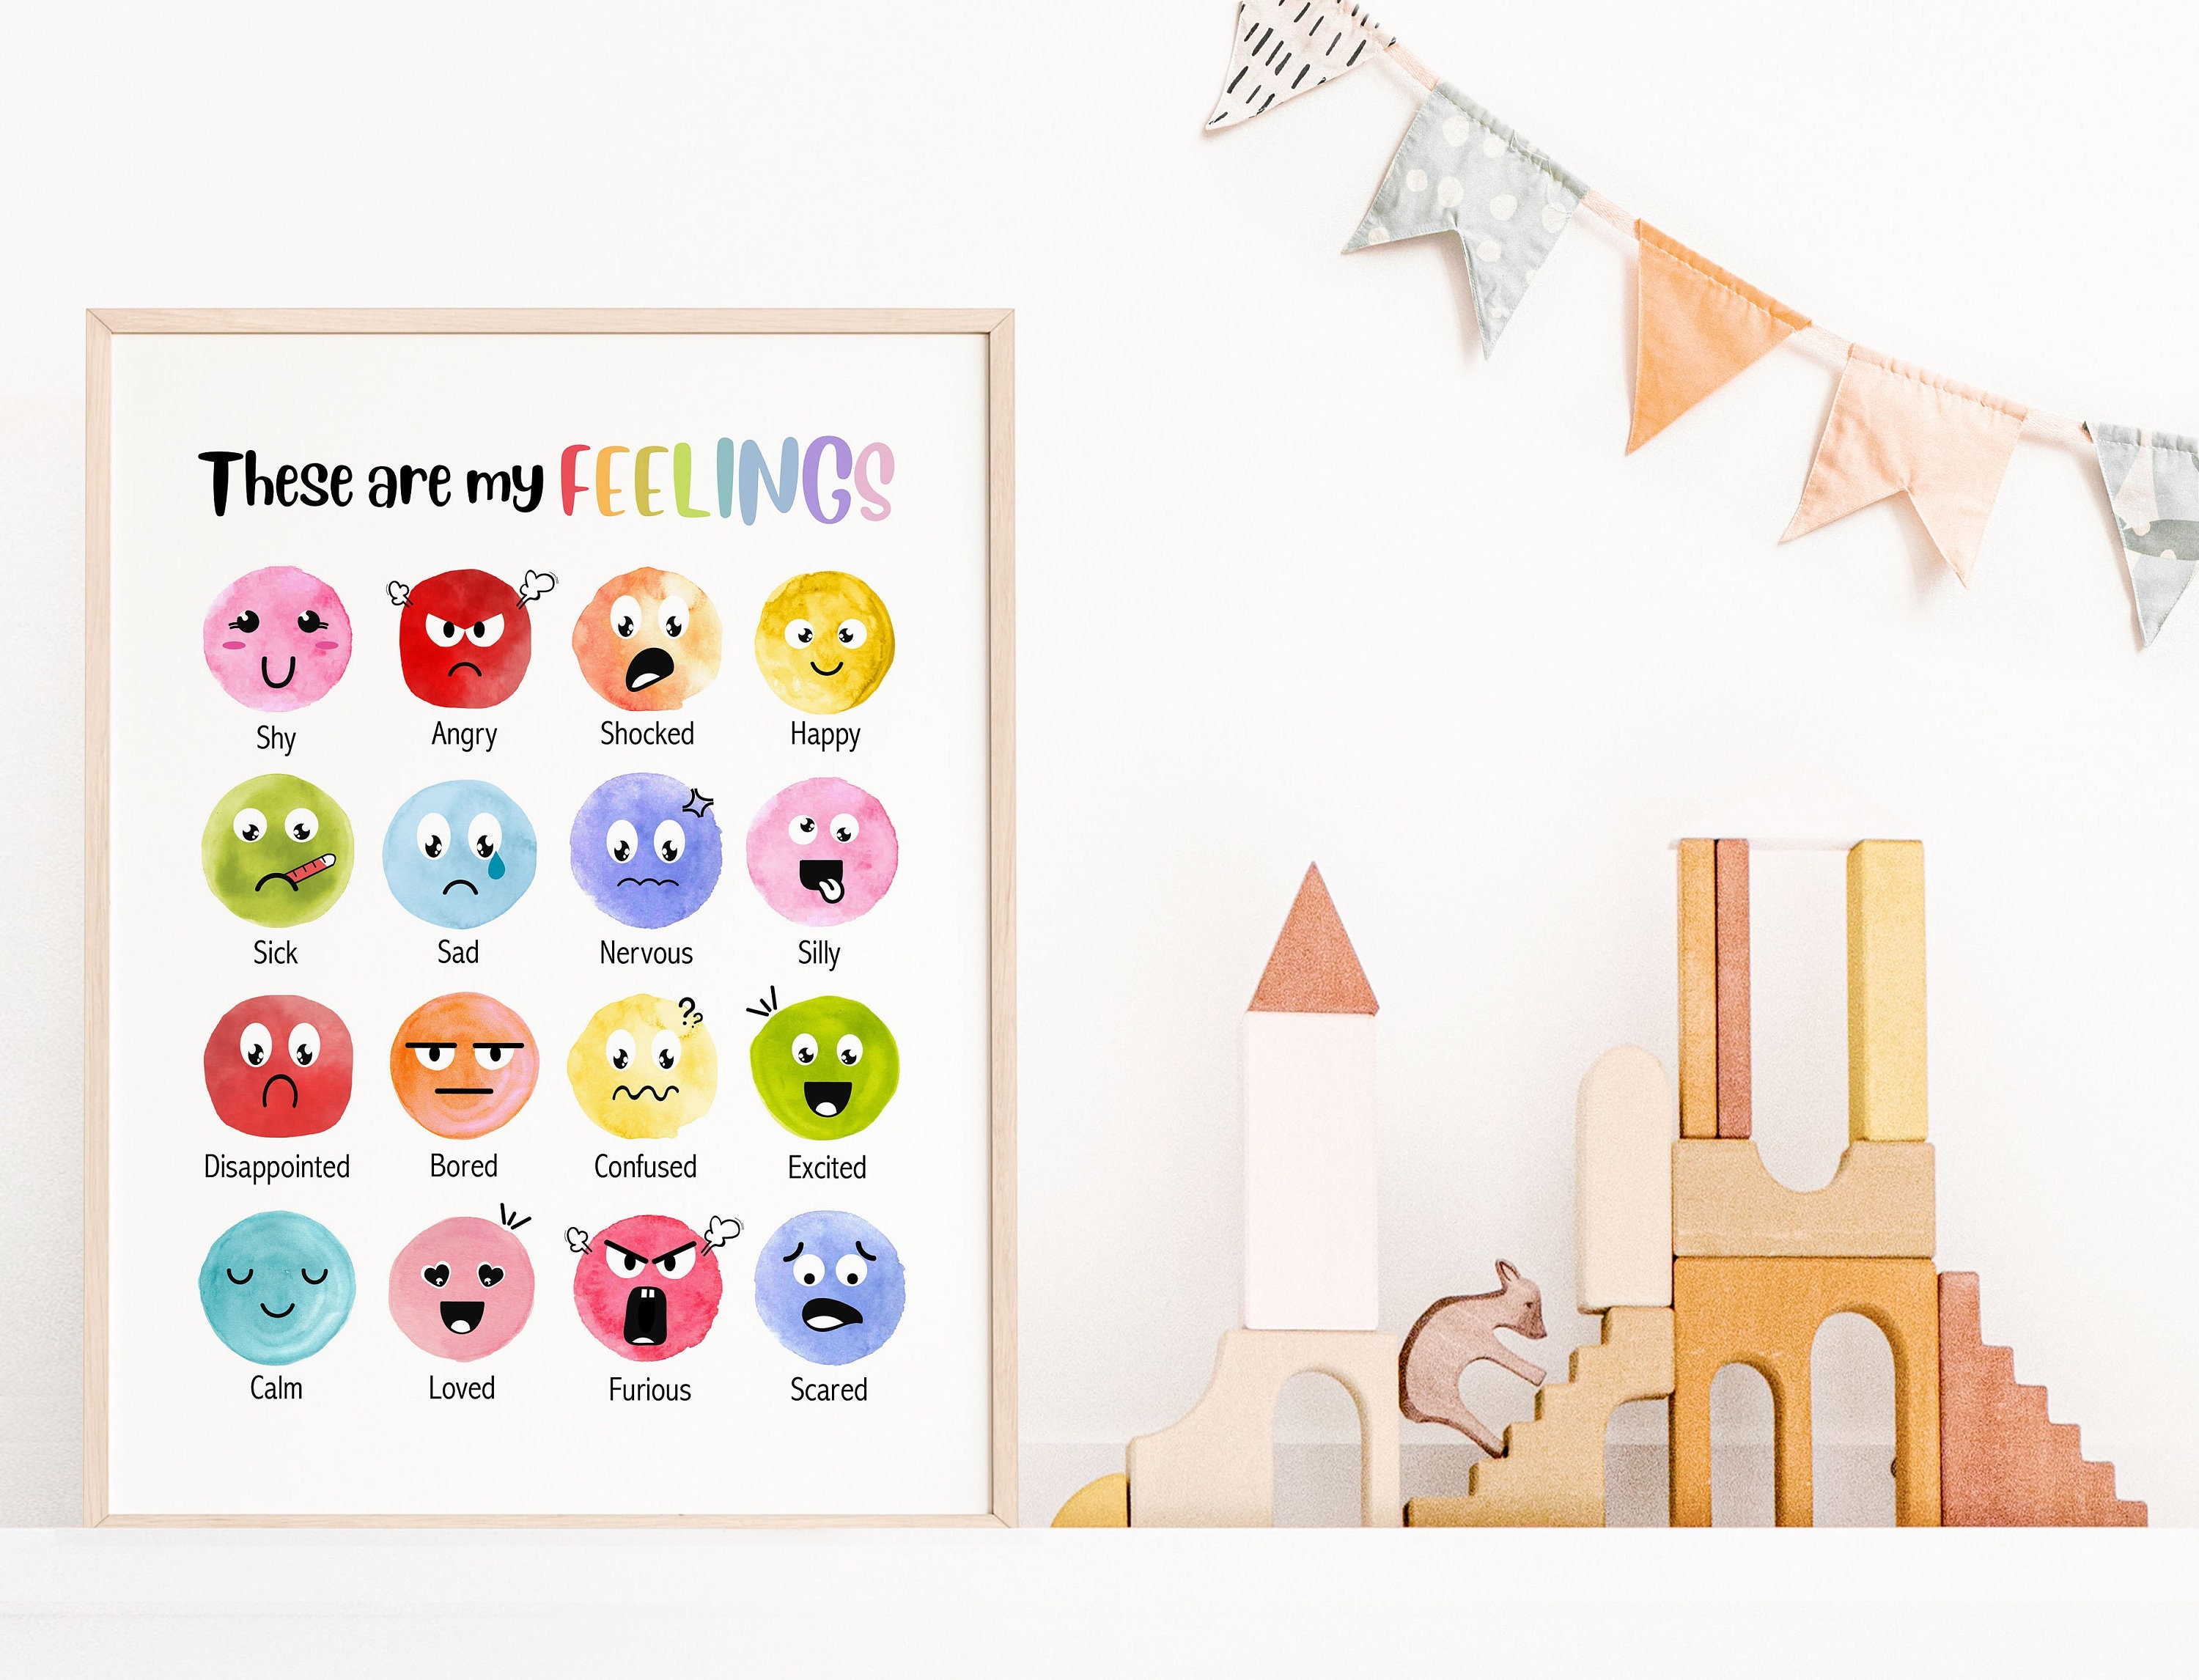 Words for My Feelings Chart Emotions Poster School Counselor - Etsy